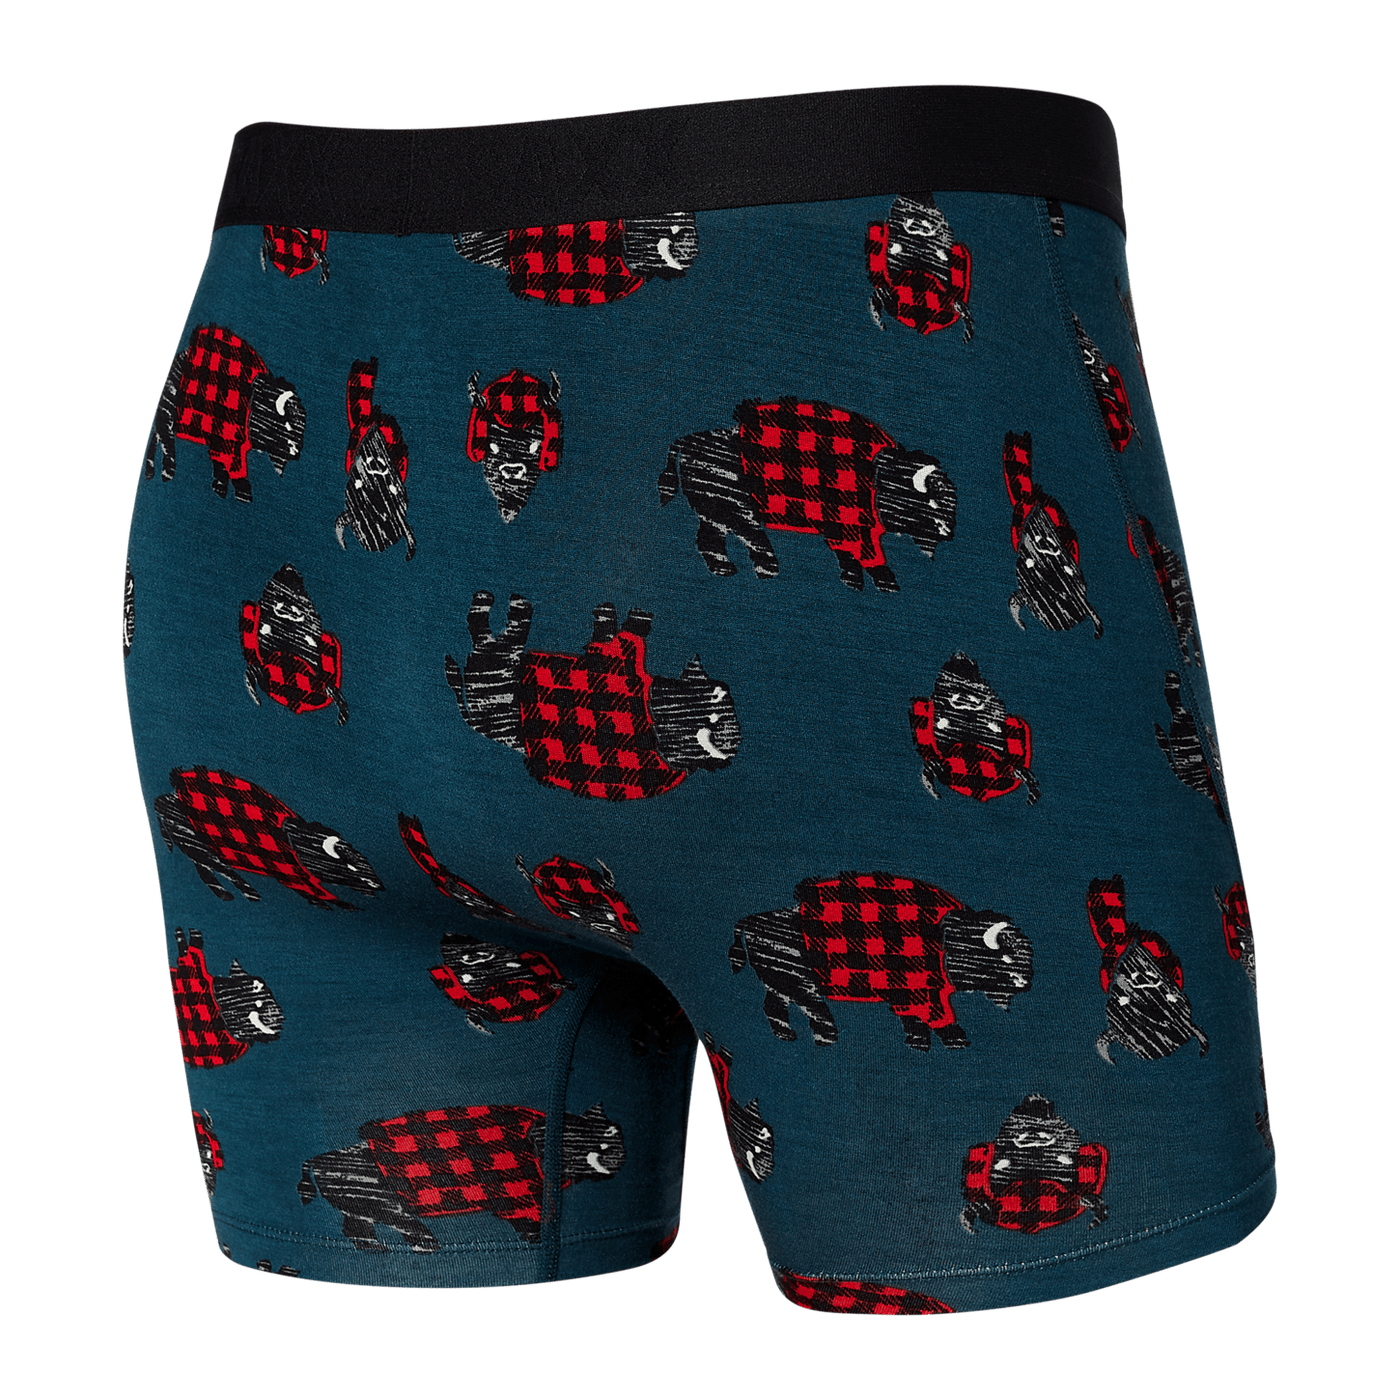 Saxx Ultra Boxers - Storm Blue Buffalo Check - The Hockey Shop Source For Sports